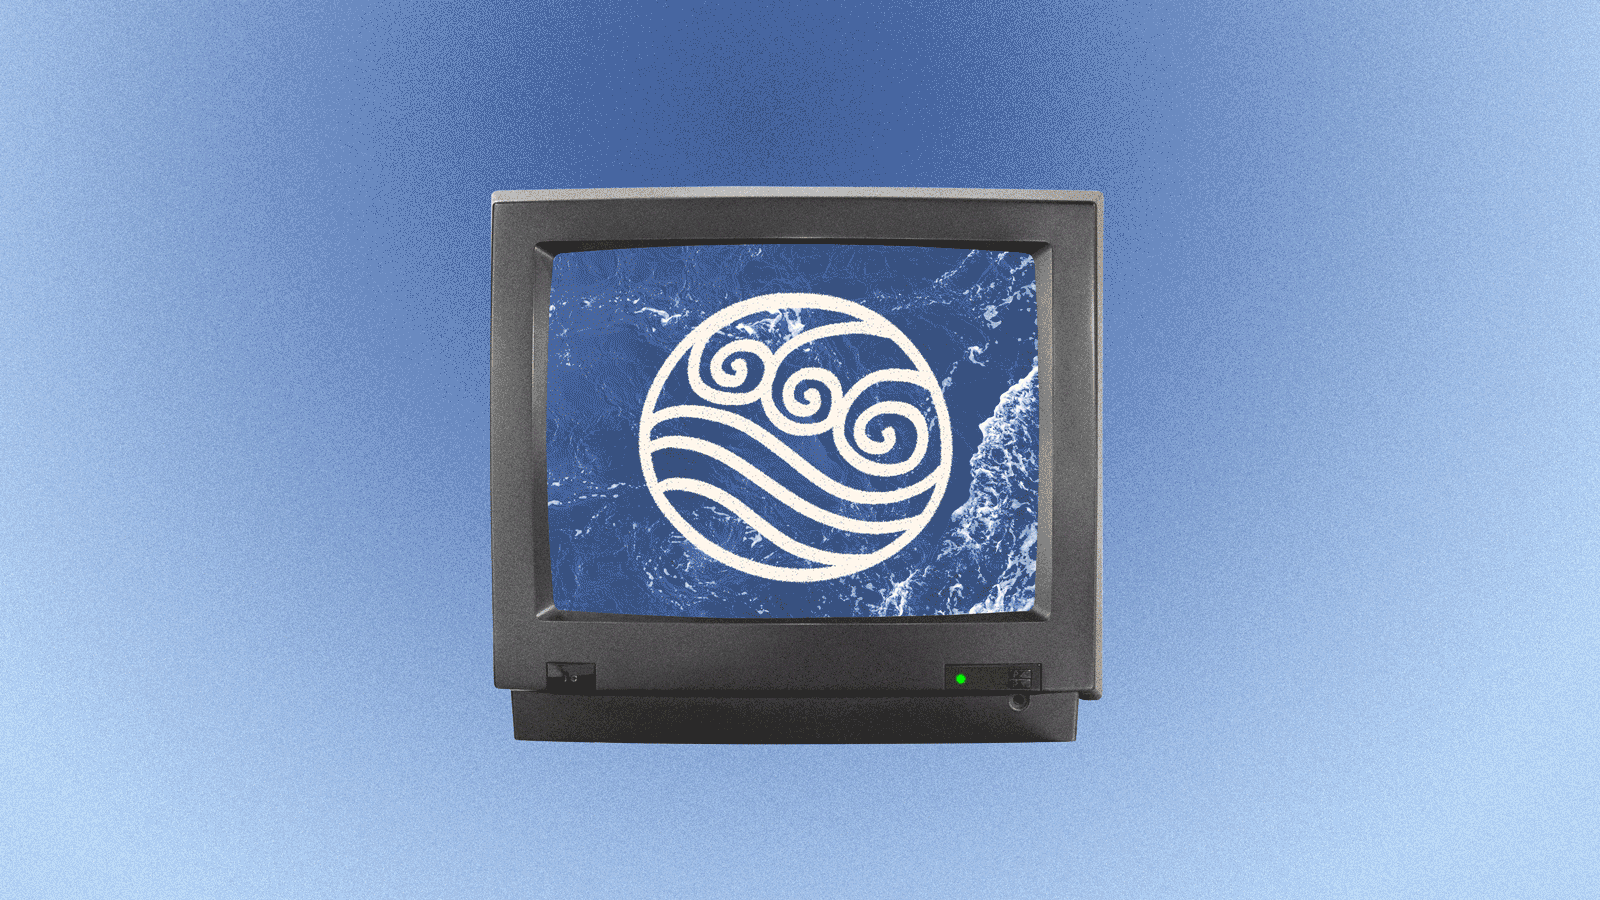 A gif showing element symbols from Avatar on a TV screen